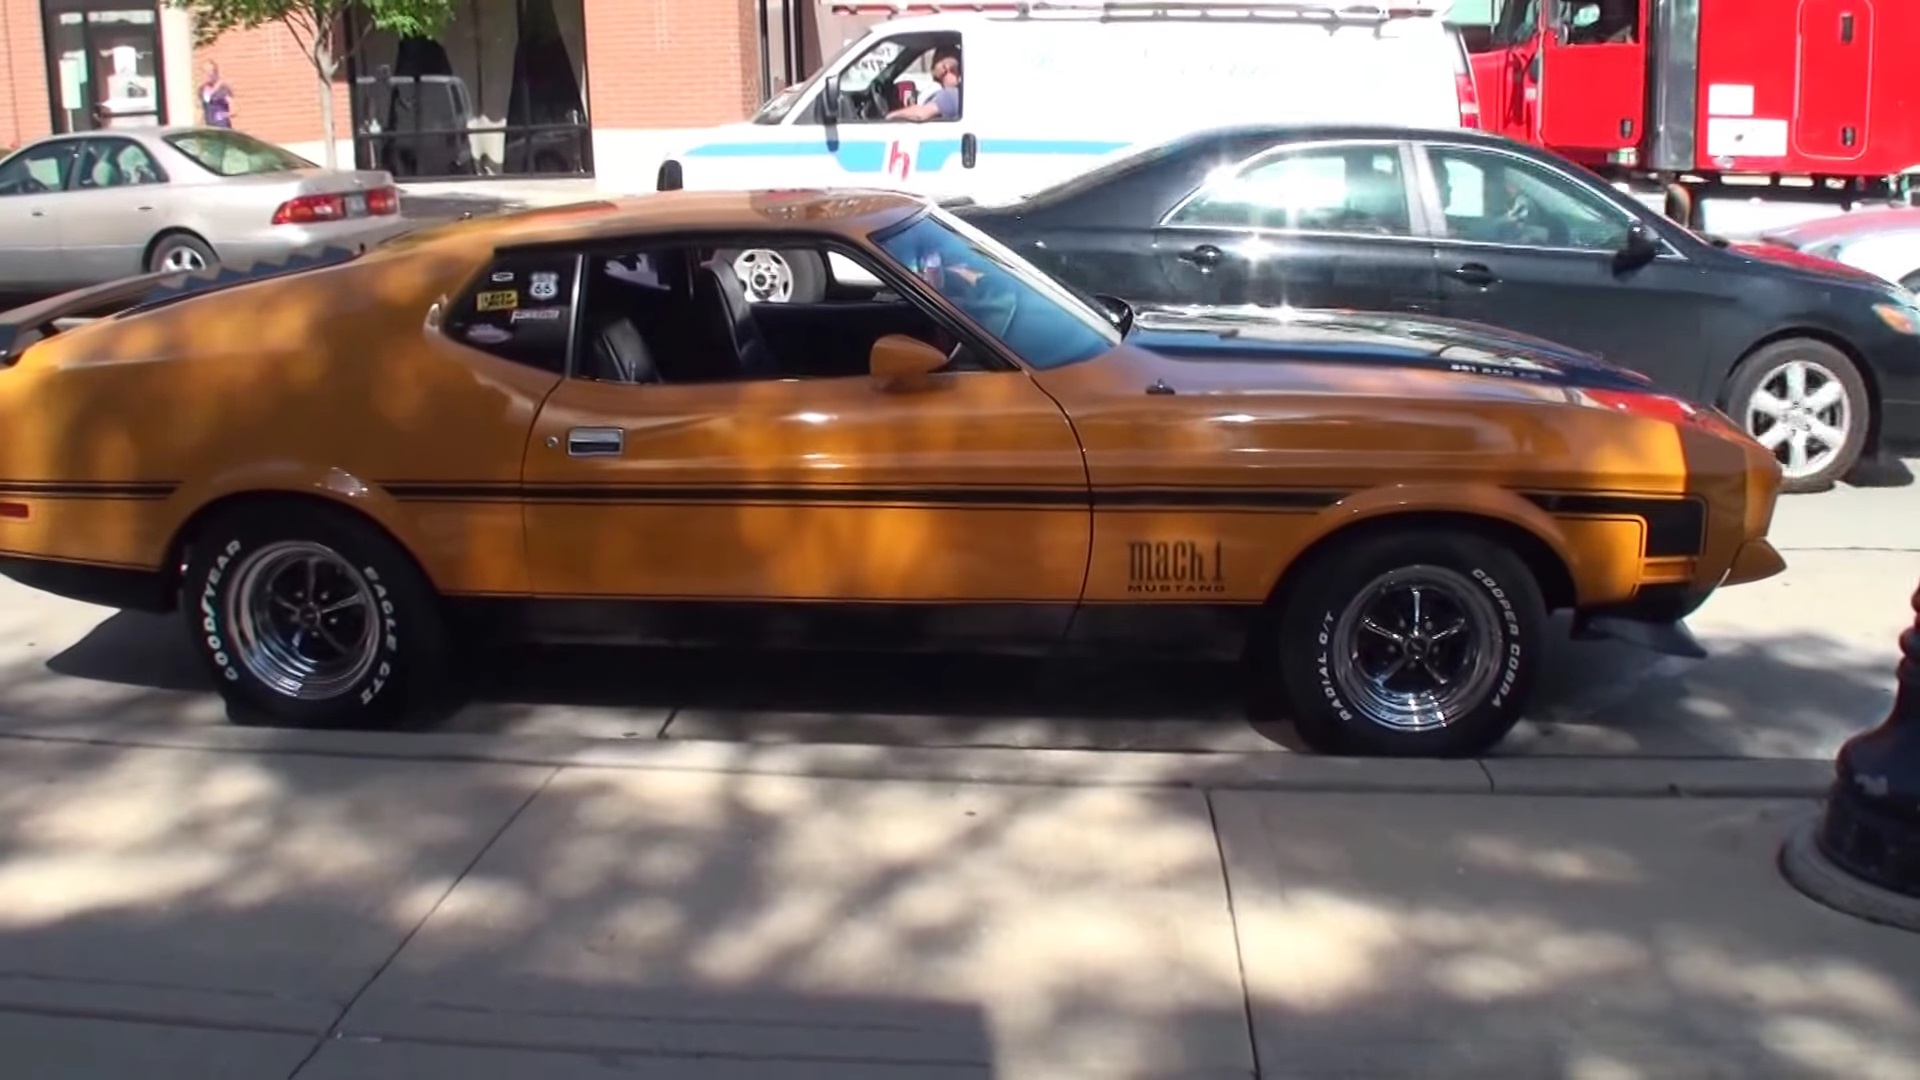 Video: Check Out The Incredible Story Behind This 1972 Ford Mustang Mach 1